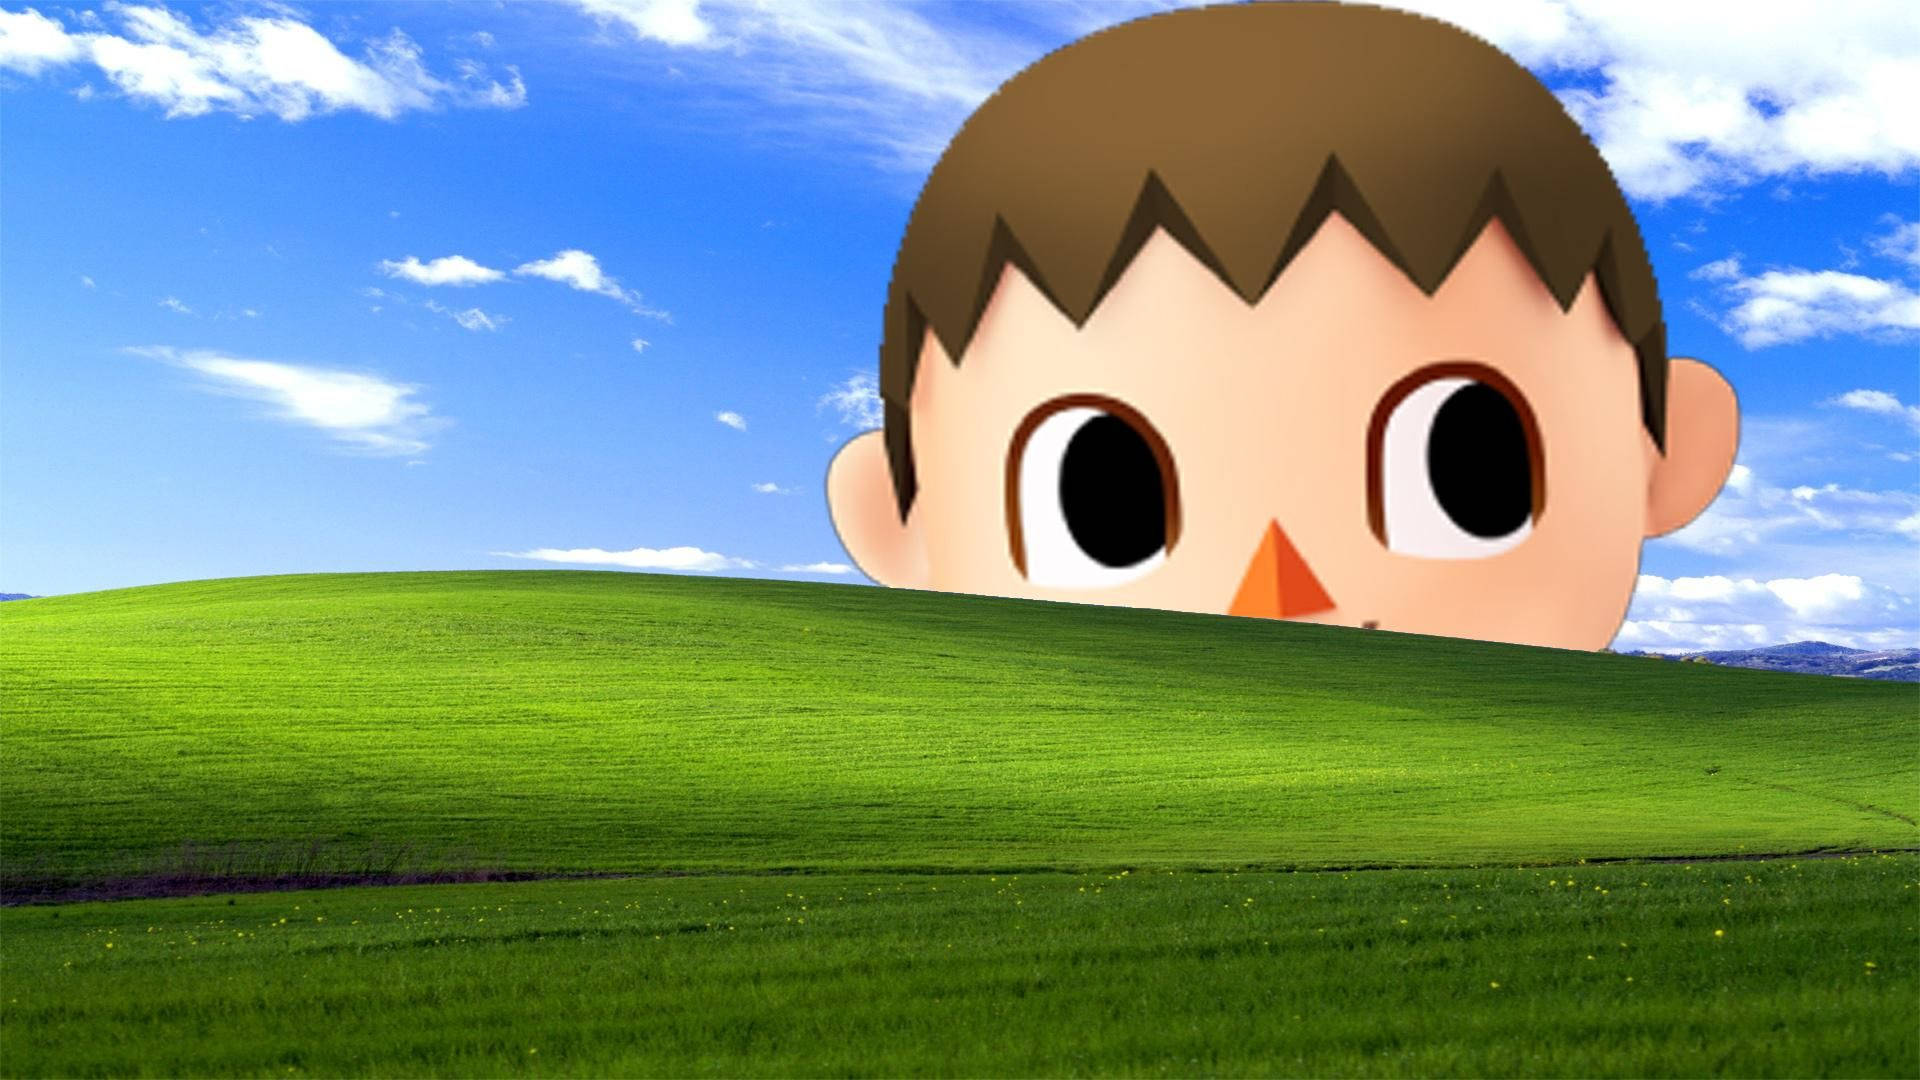 Don't forget to leave the creepy Animal Crossing villager a nice tip Wallpaper